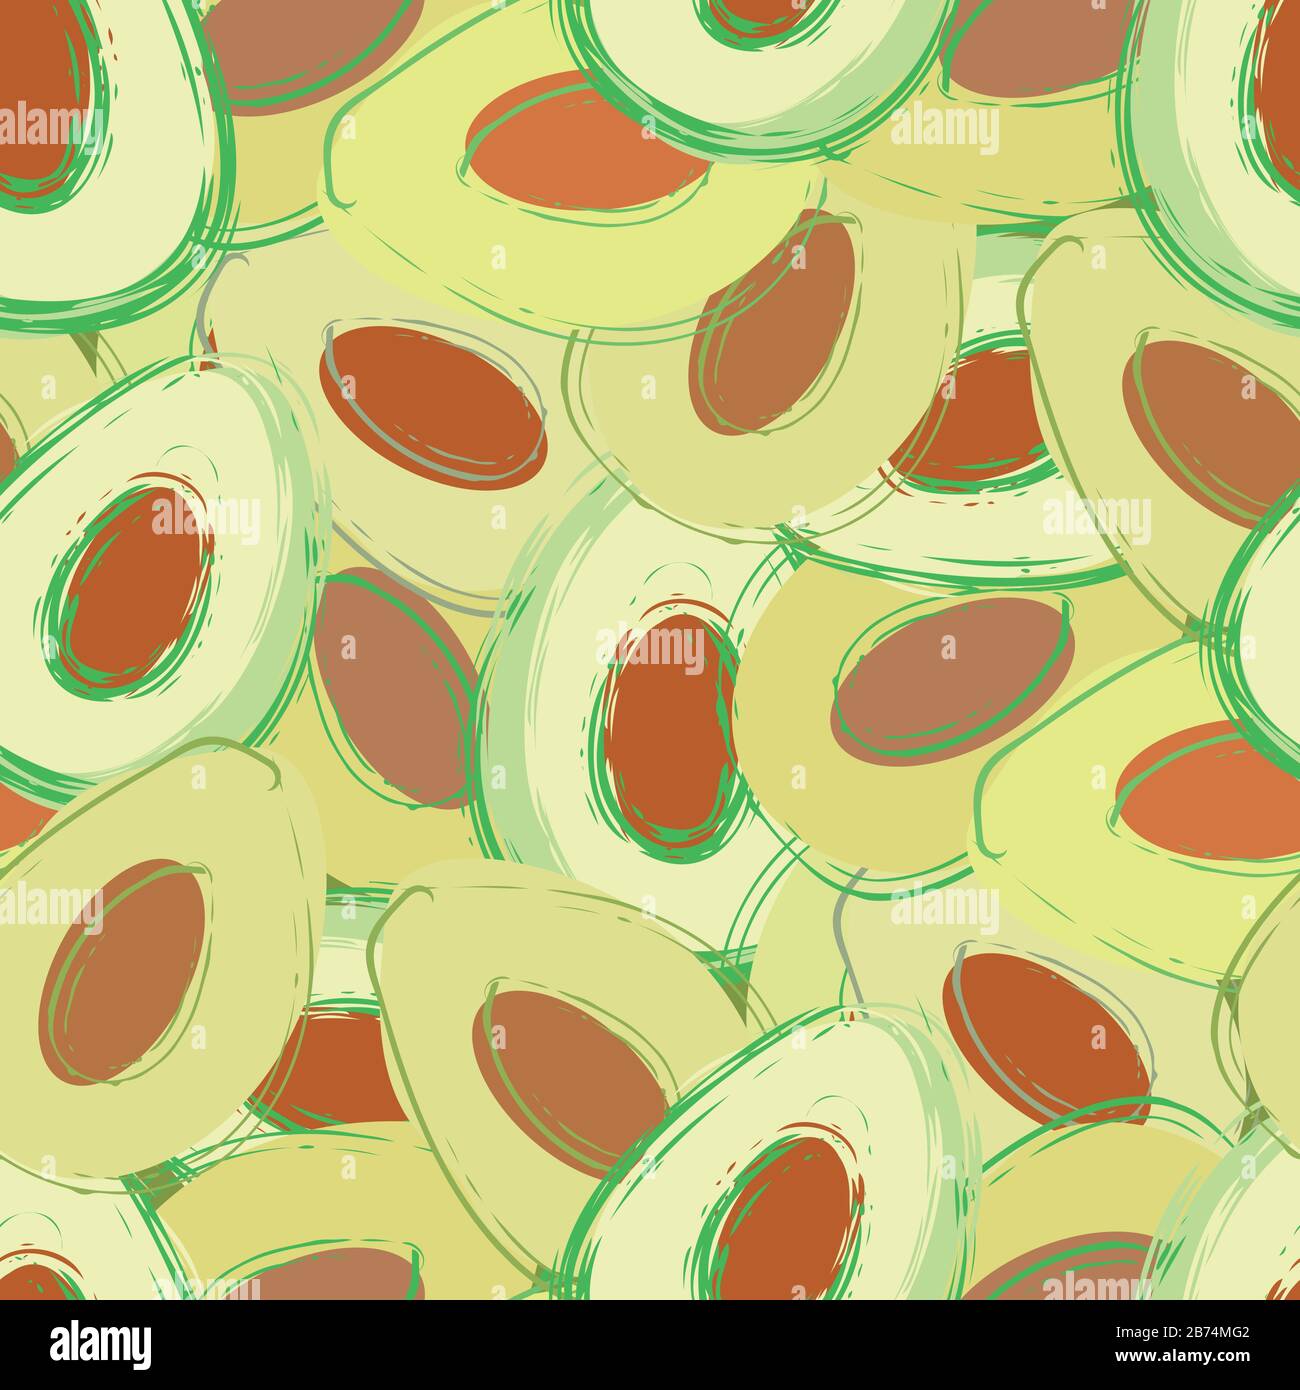 Avocado seamless vector pattern background. Hand drawn painterly fruit ...